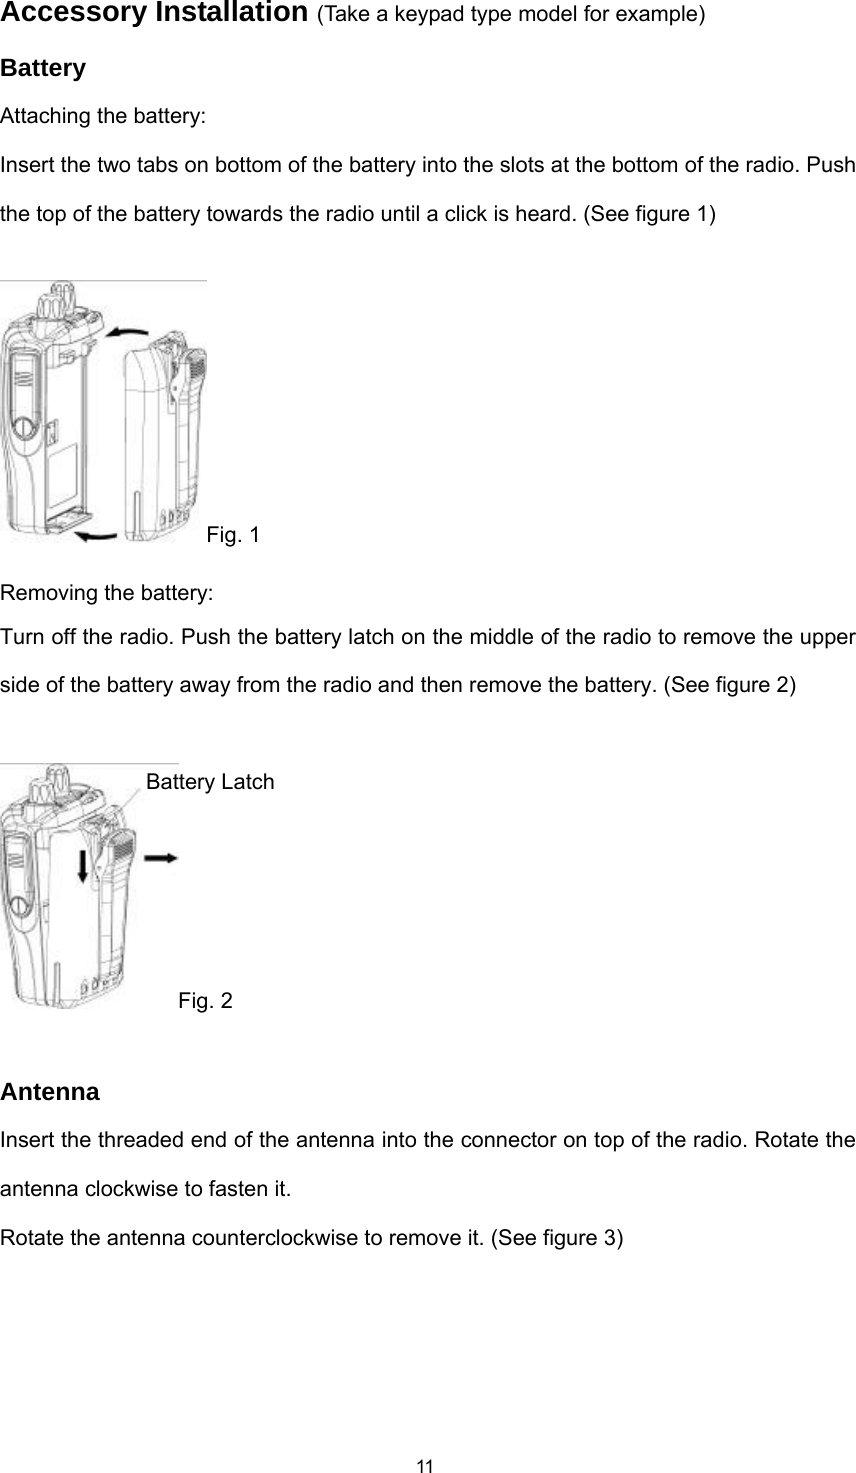  11Accessory Installation (Take a keypad type model for example) Battery Attaching the battery: Insert the two tabs on bottom of the battery into the slots at the bottom of the radio. Push the top of the battery towards the radio until a click is heard. (See figure 1) Fig. 1 Removing the battery: Turn off the radio. Push the battery latch on the middle of the radio to remove the upper side of the battery away from the radio and then remove the battery. (See figure 2)  Fig. 2  Antenna Insert the threaded end of the antenna into the connector on top of the radio. Rotate the antenna clockwise to fasten it. Rotate the antenna counterclockwise to remove it. (See figure 3) Battery Latch 